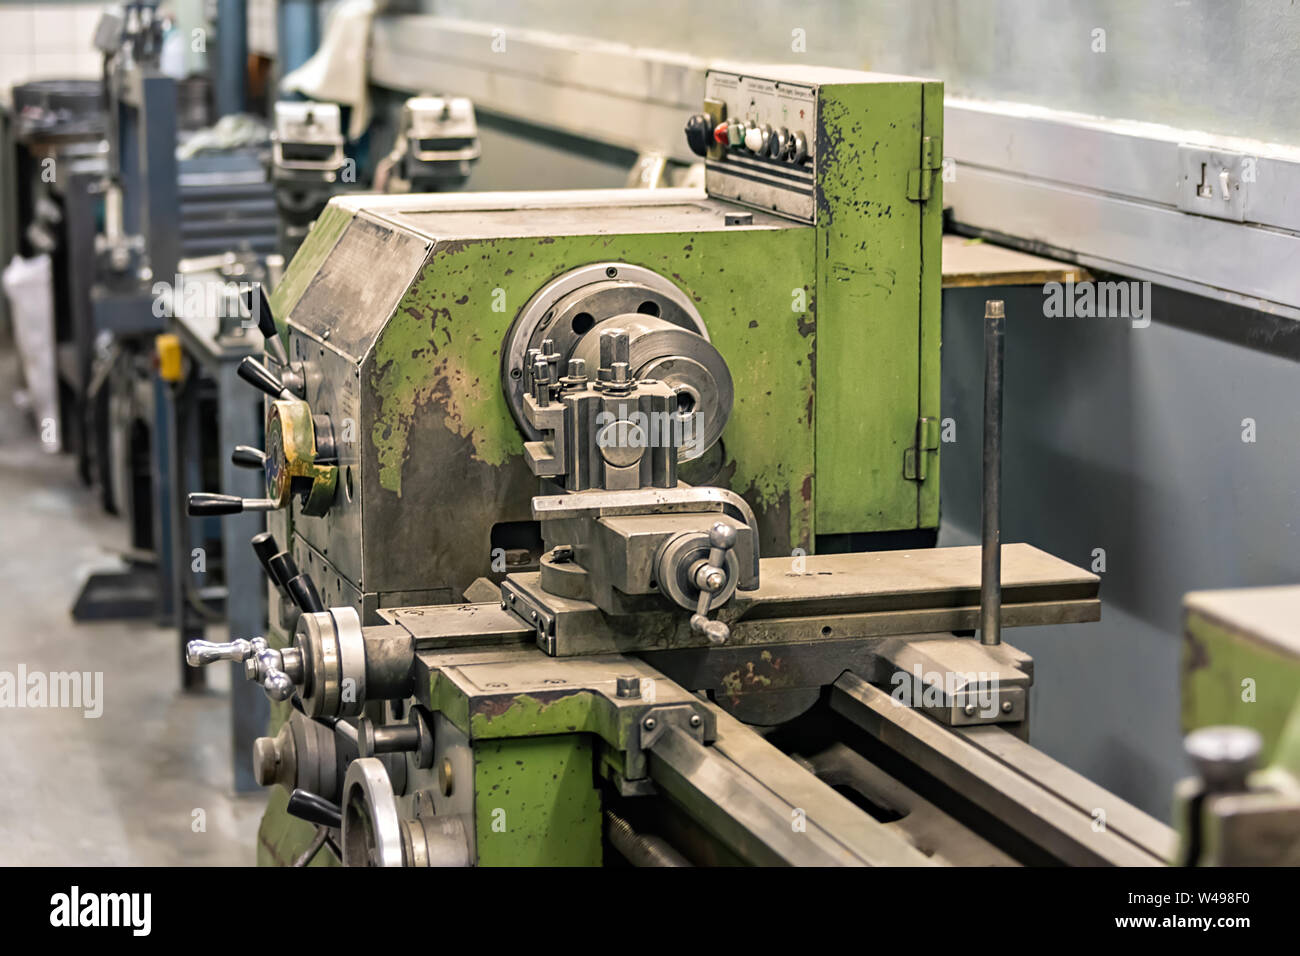 A lathe machine in a well-organized industrial workshop Stock Photo - Alamy